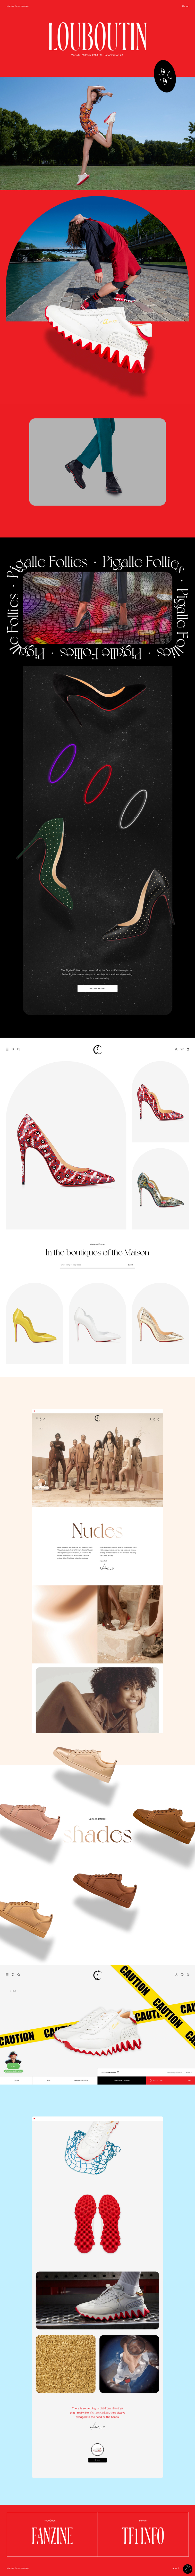 Marine Gourvennec Landing Page Example: I'm an art director with 8+ years of experience, based in Paris. Nice to meet u.